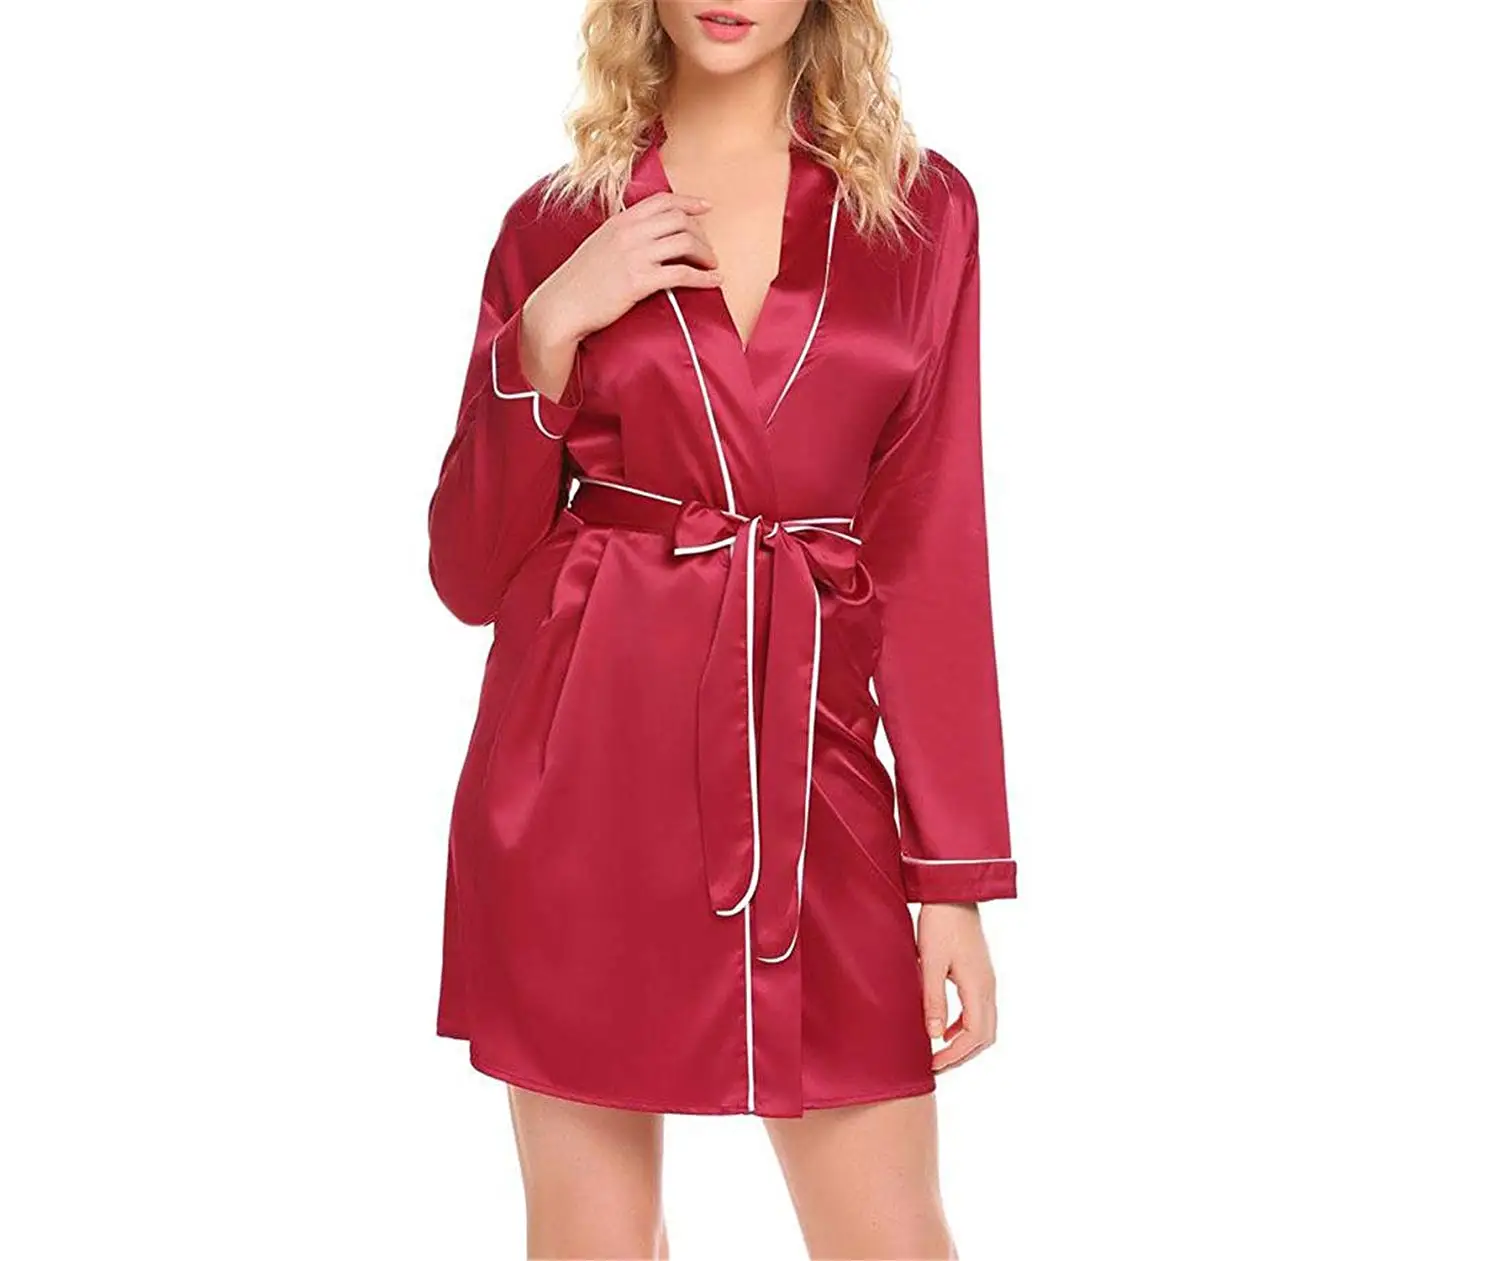 Cheap Sexy Bath Robes, find Sexy Bath Robes deals on line at Alibaba.com